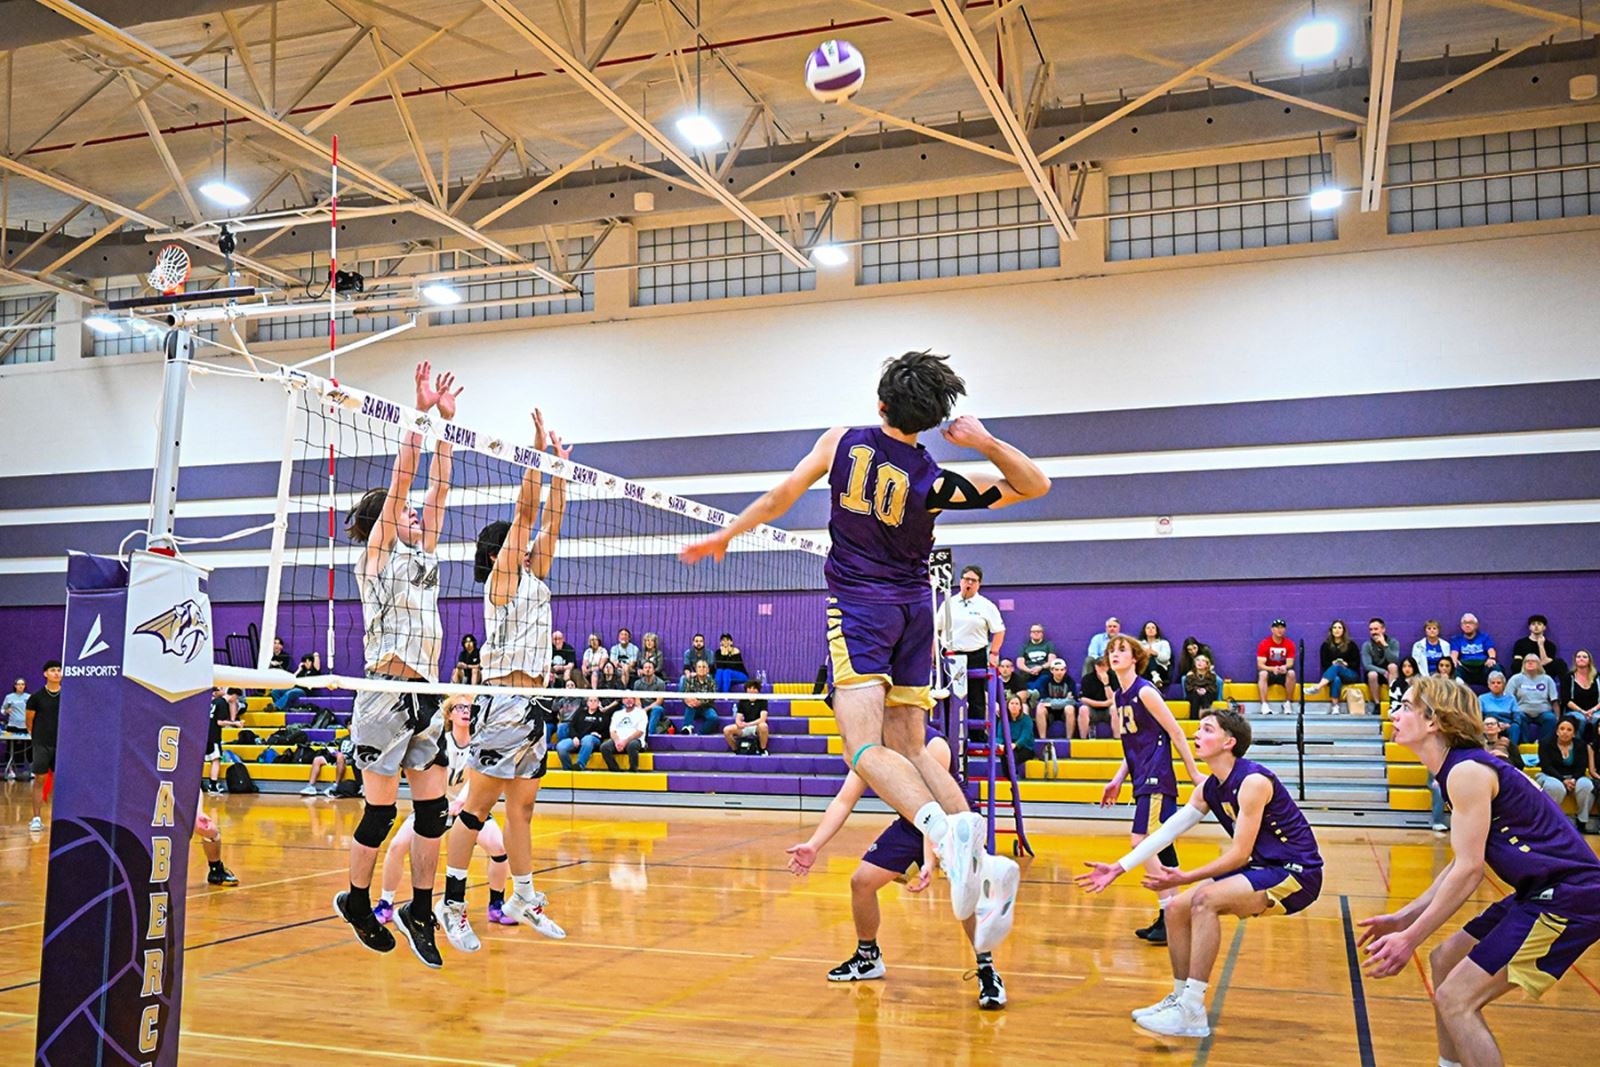 A Sabino player spikes the ball over the net